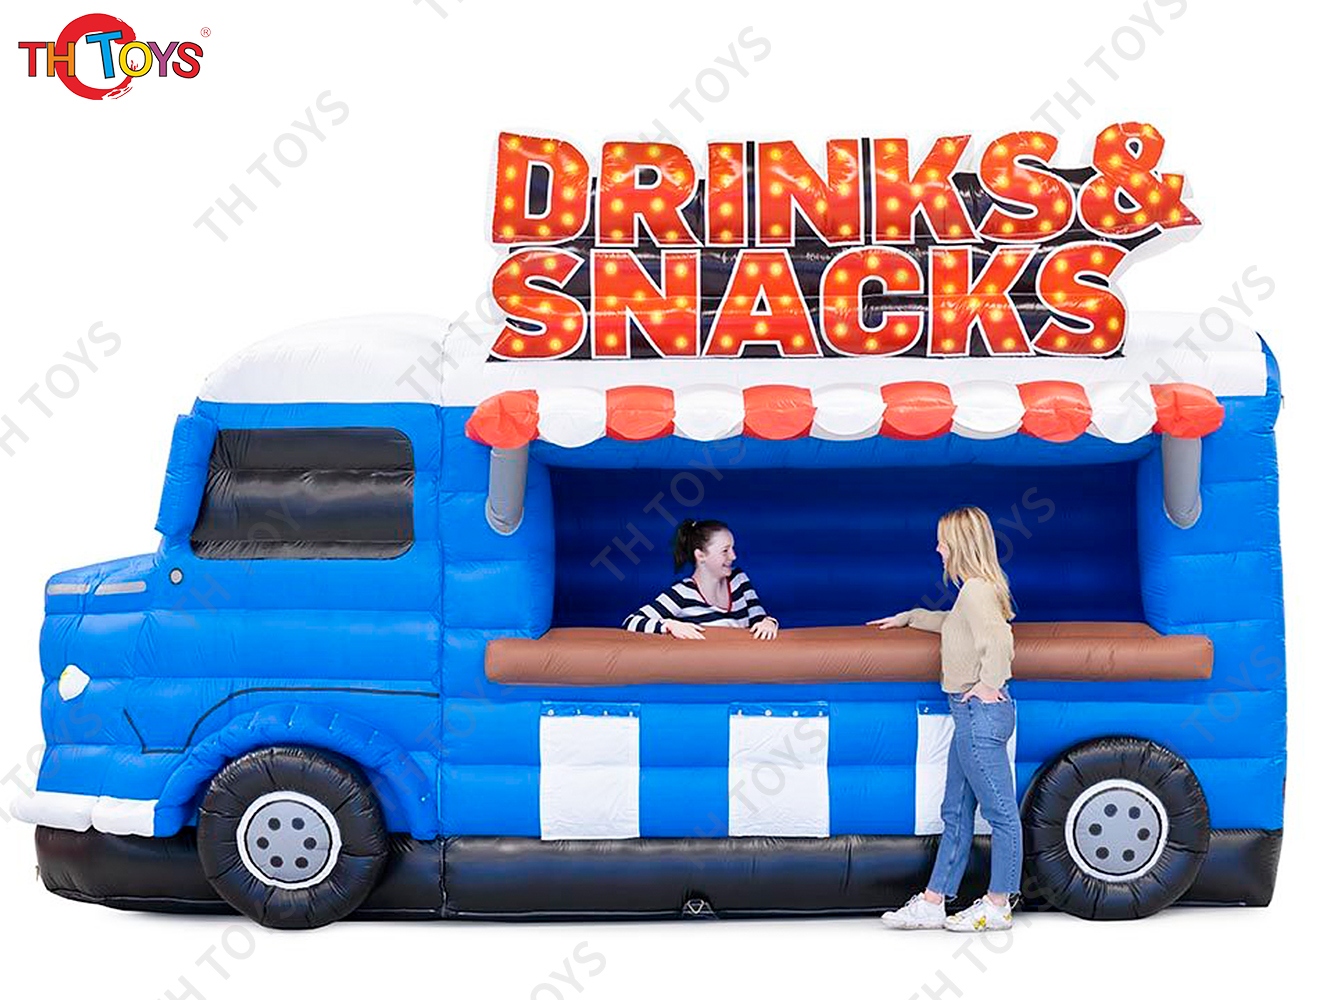 Fashion Move Inflatable Food Car Booth Kiosk Truck Cotton Candy Theme Stall,Pop Corn Concession Stand Coffee Drink Bar For Sale